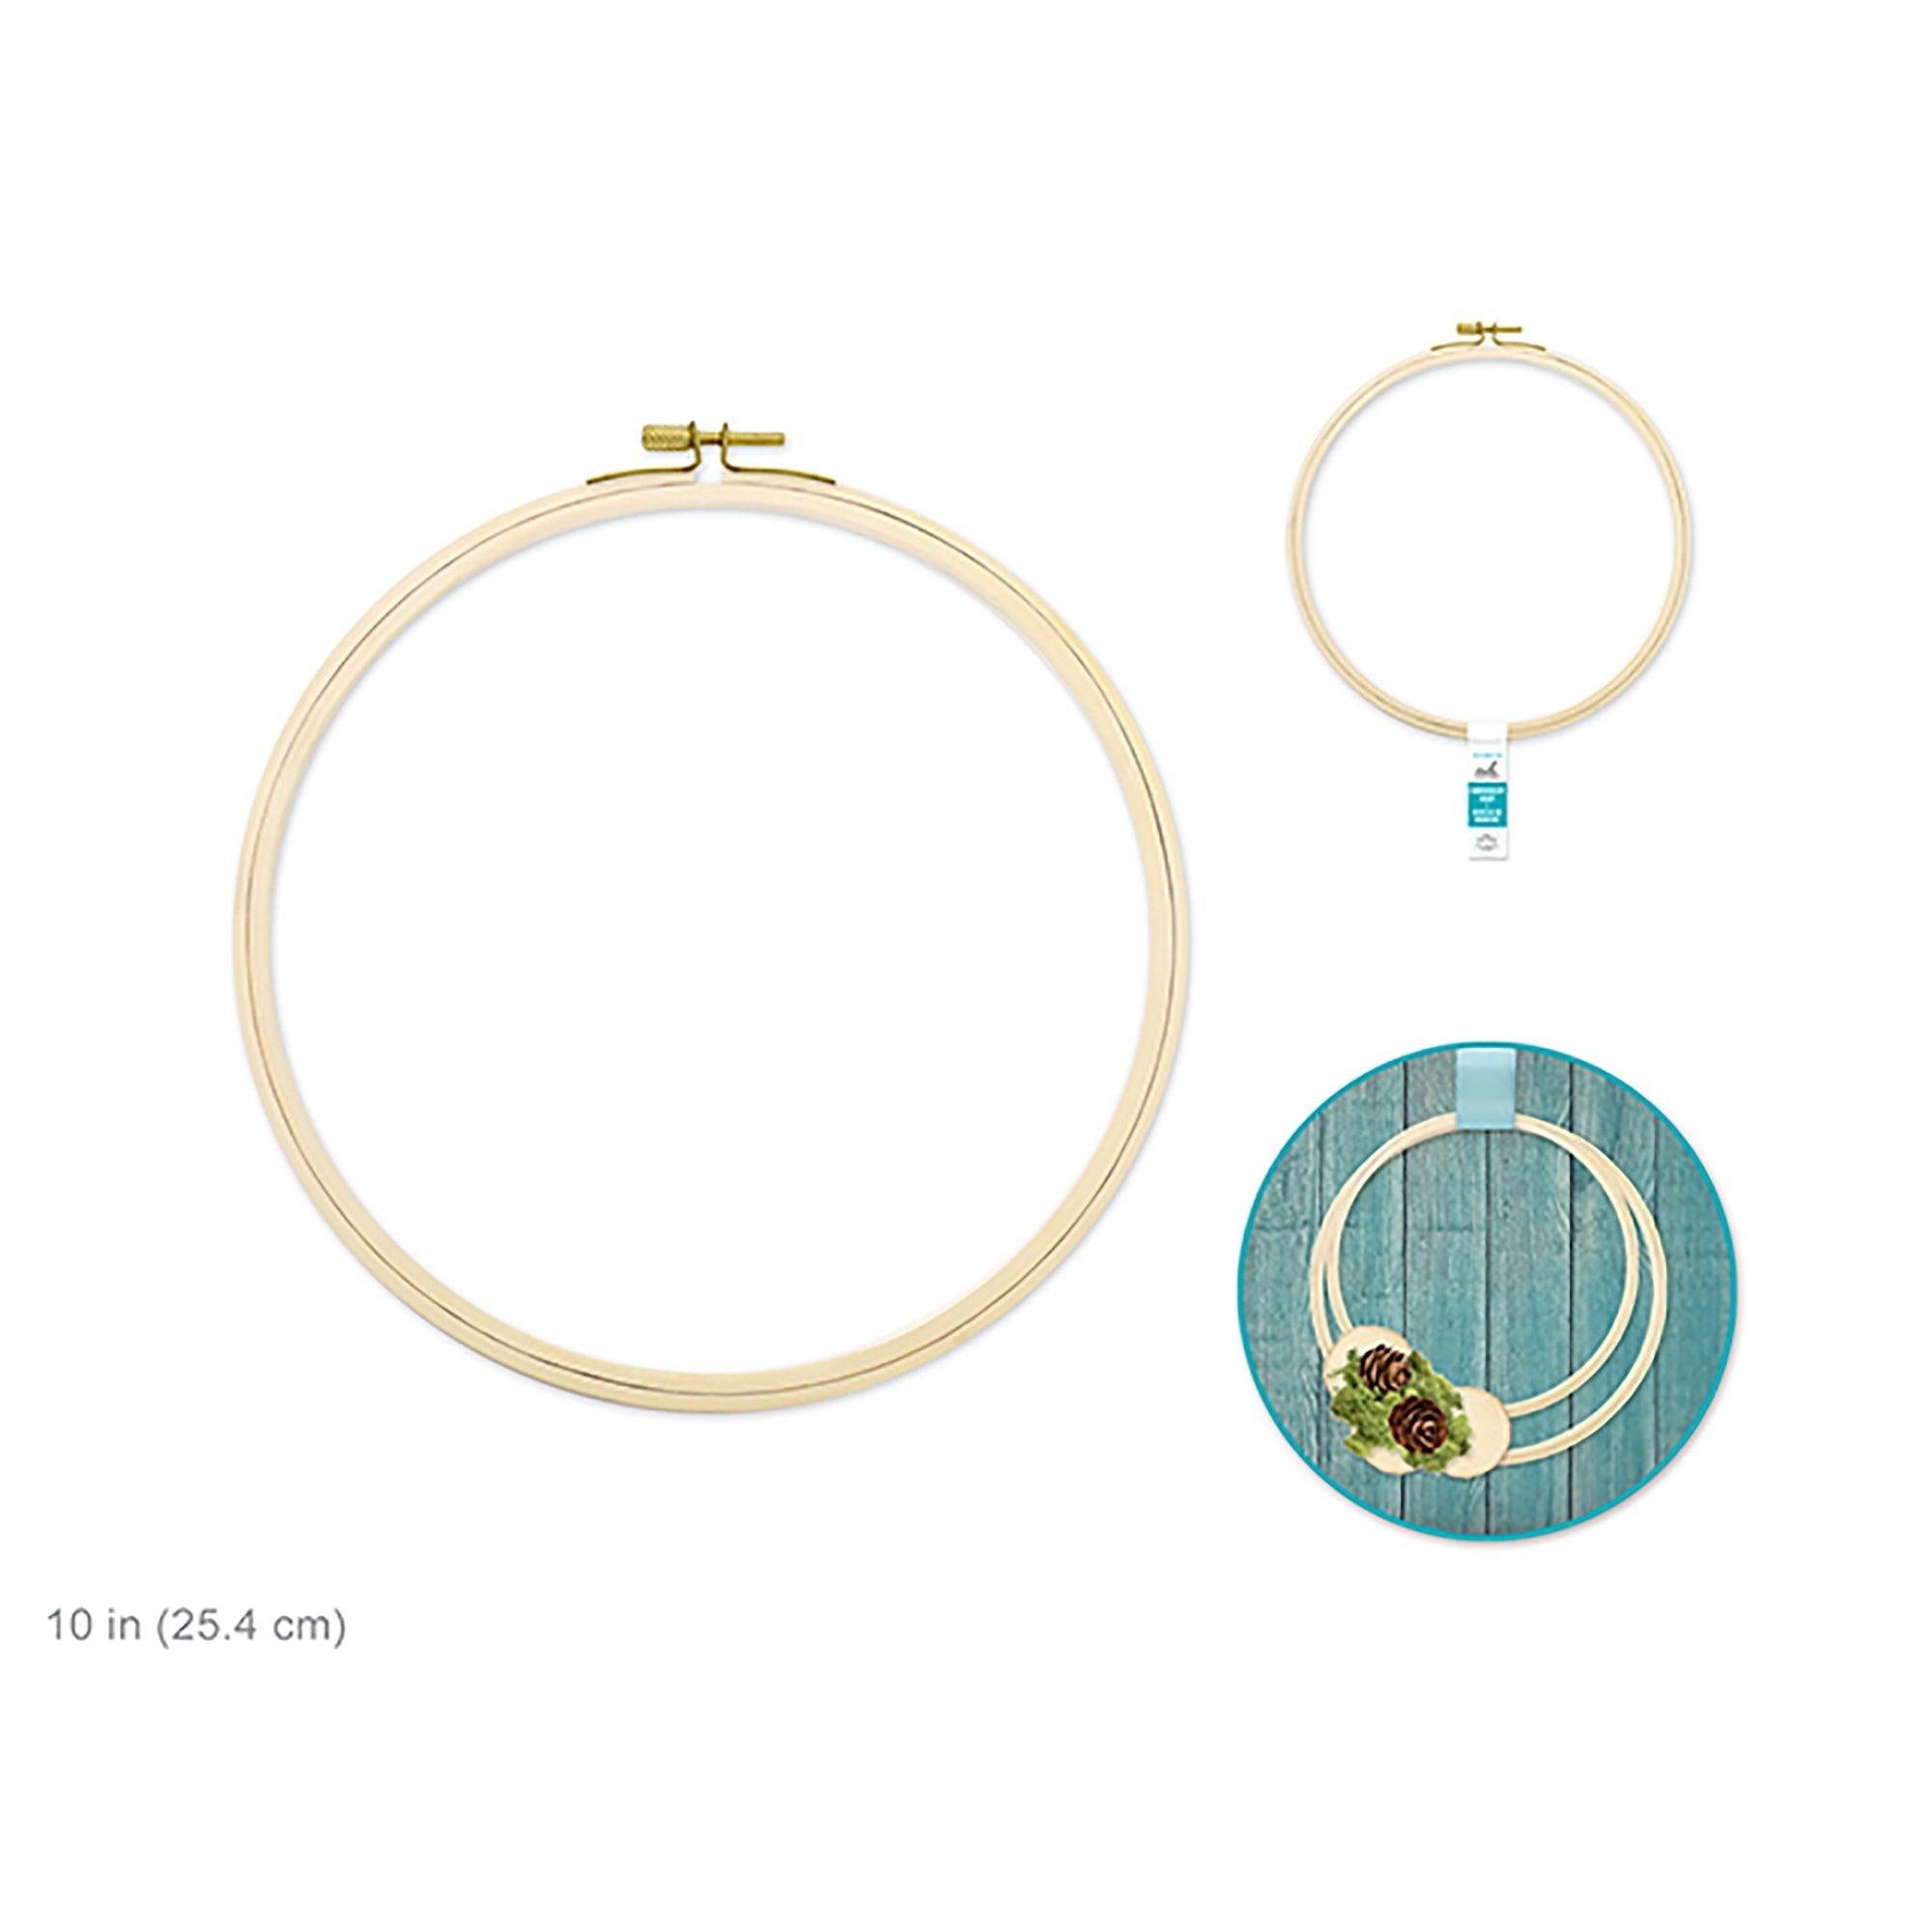 Needlecrafters: 10 inch Embroidery Hoop w/Brass Clamp - Dollar Max Depot